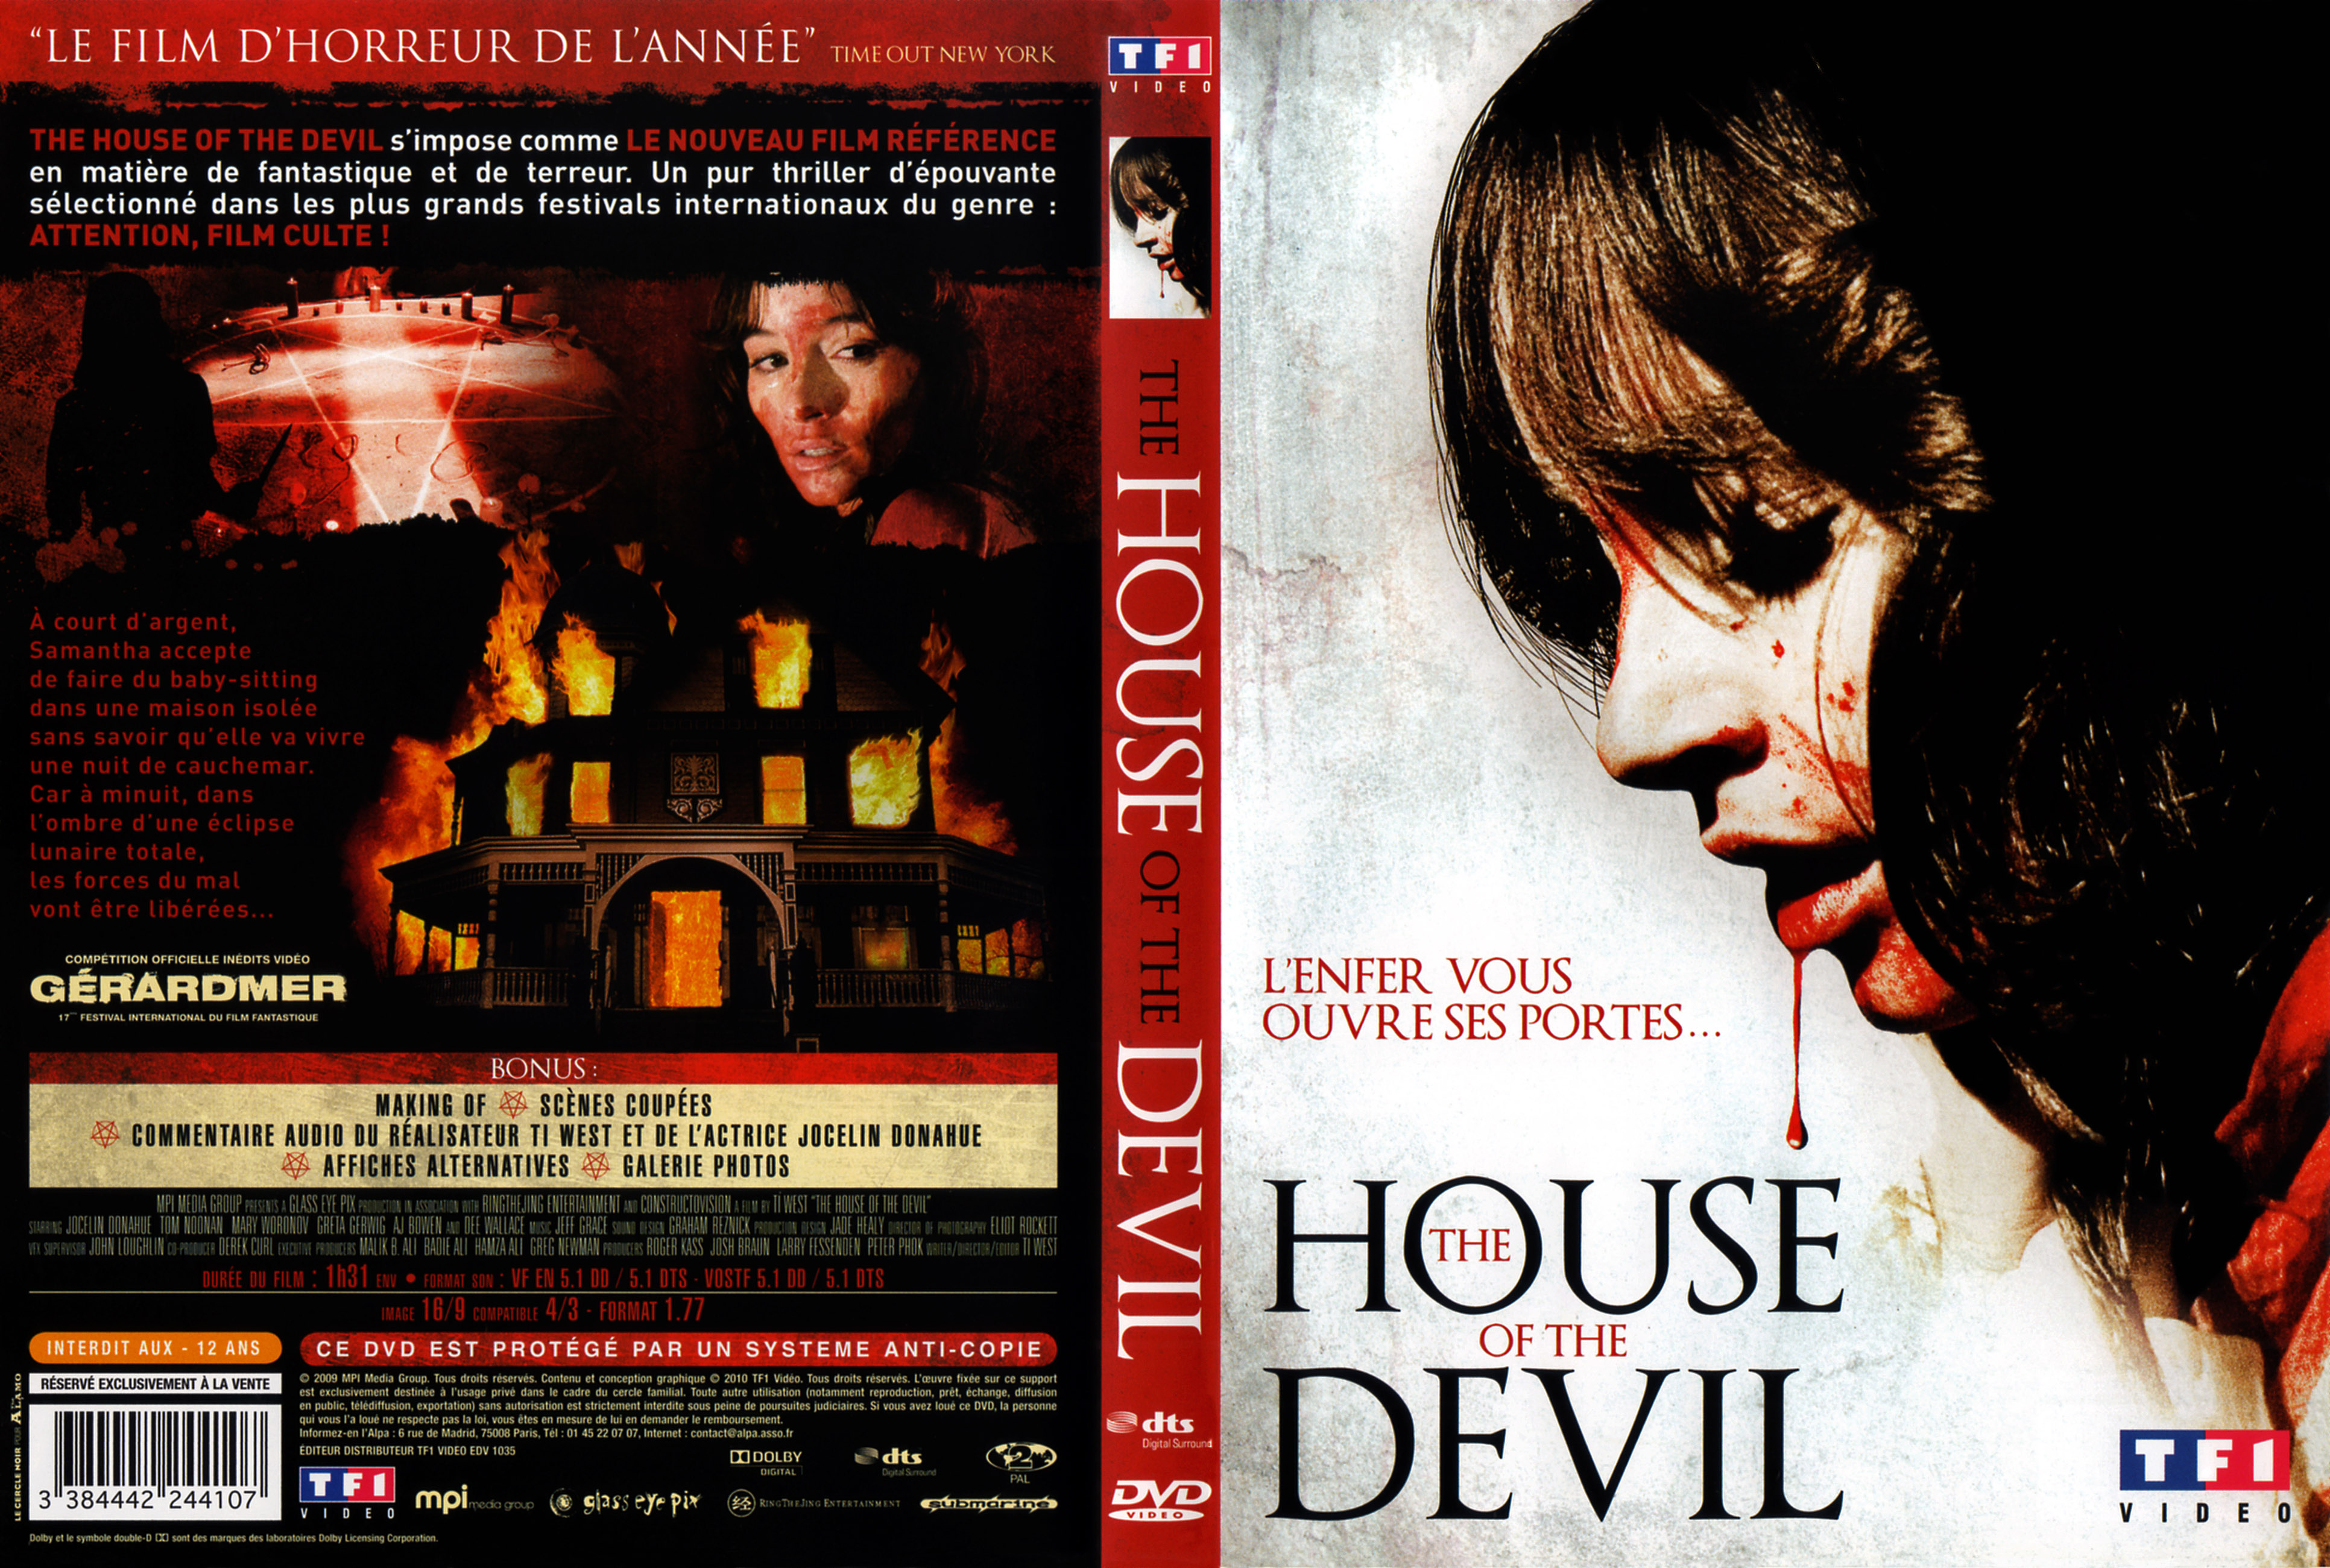 Jaquette DVD The house of the devil